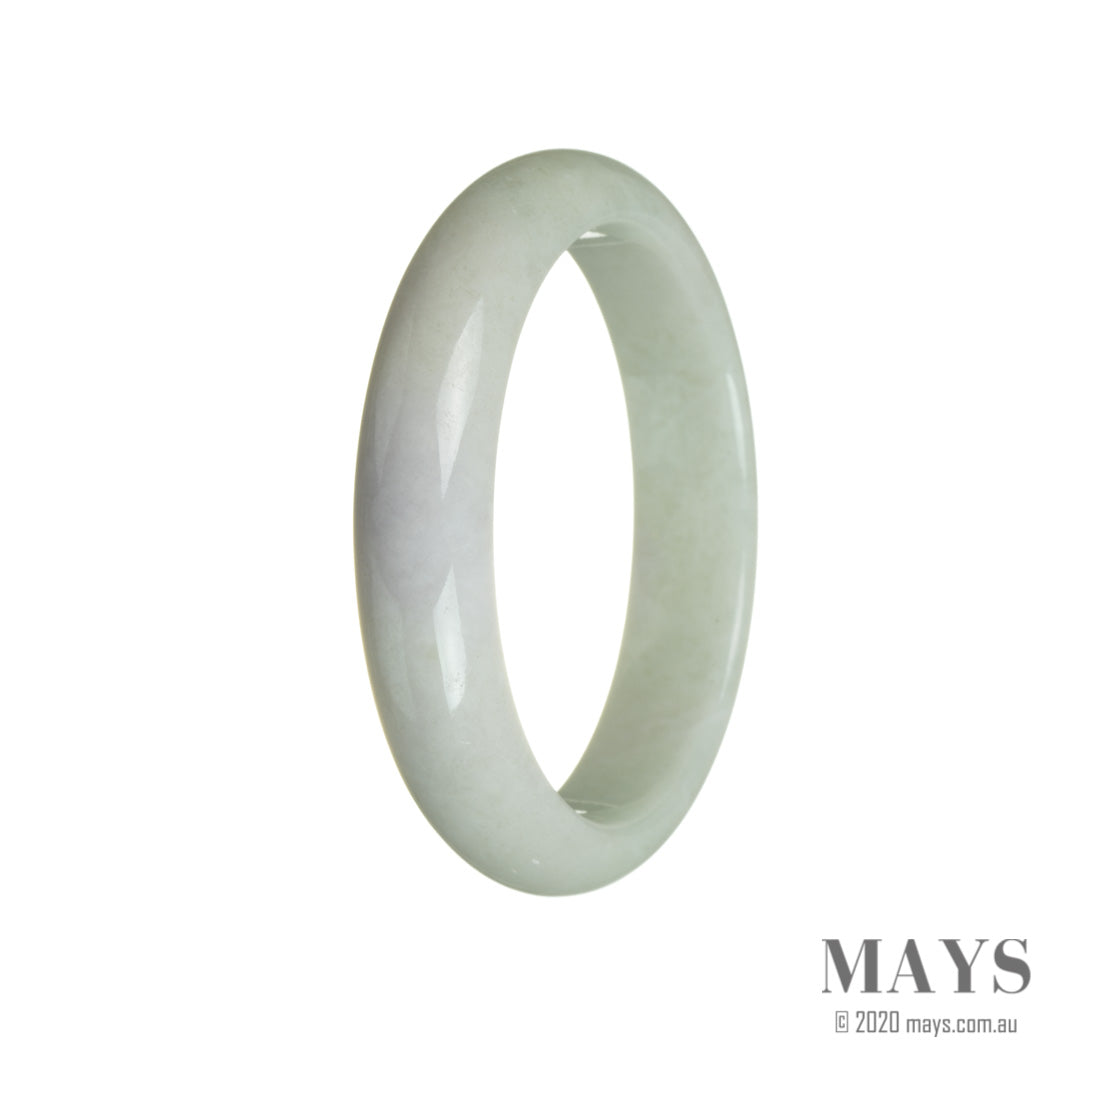 A beautiful jadeite bangle bracelet with a pale green and lavender hue, featuring a 60mm half moon shape. Handcrafted and untreated, this genuine piece from MAYS™ is a timeless accessory.